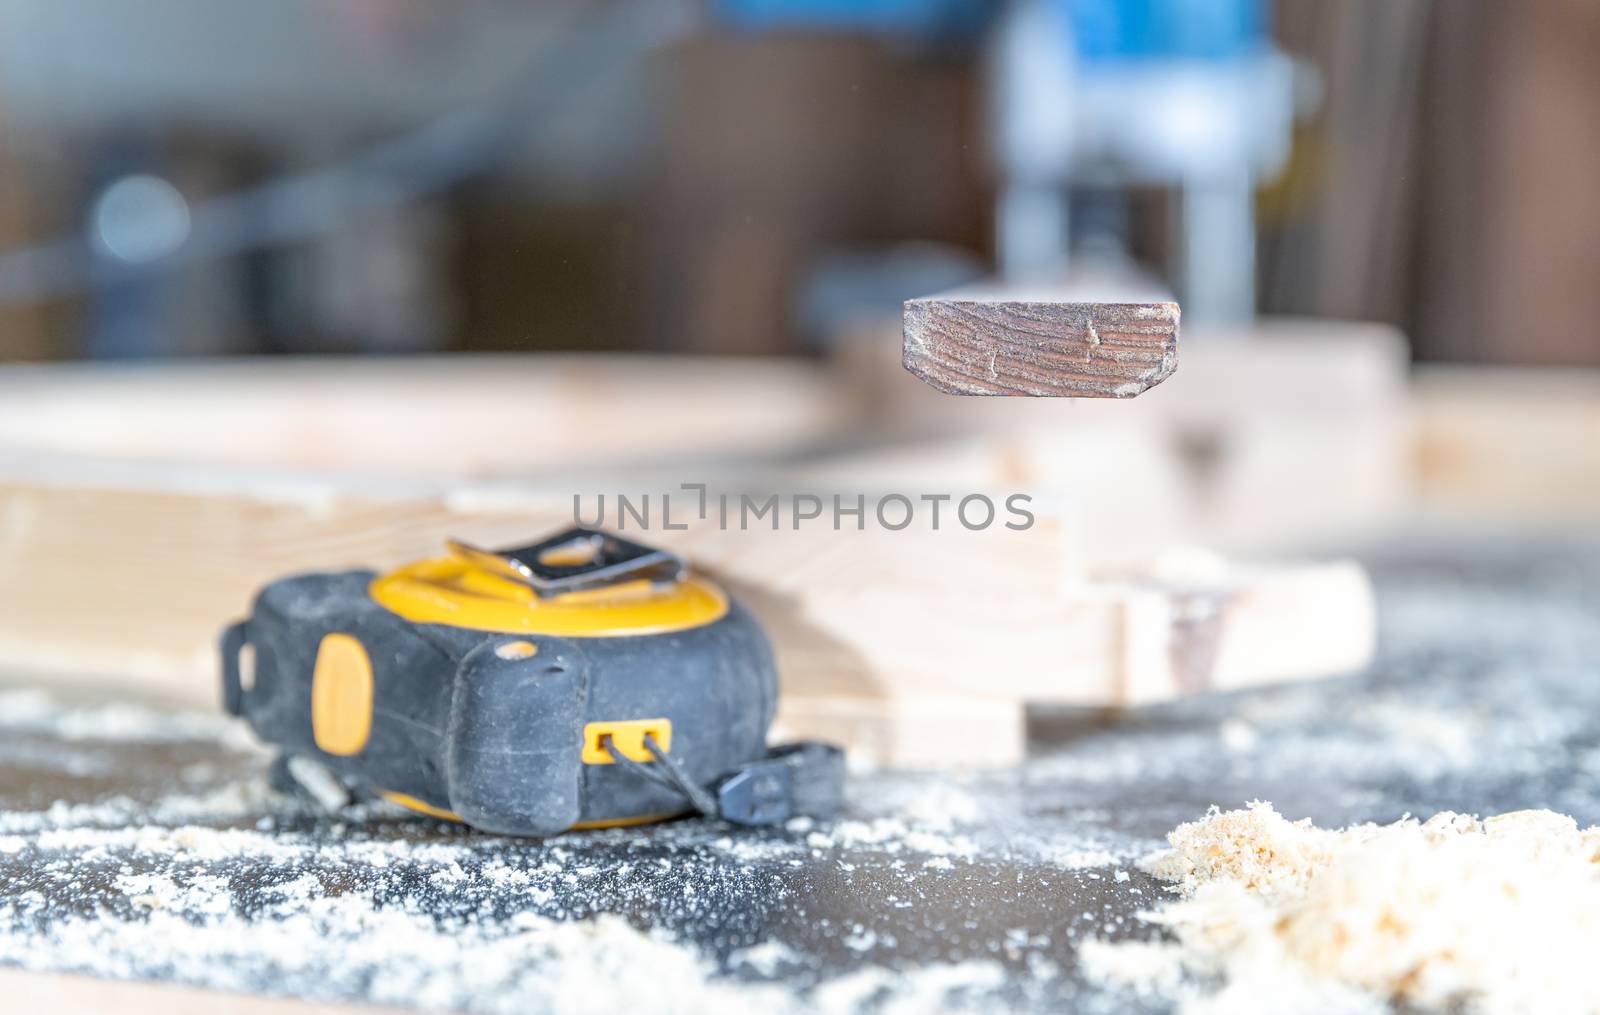 Retractable measuring tape on a desk with sawdust in joinery.